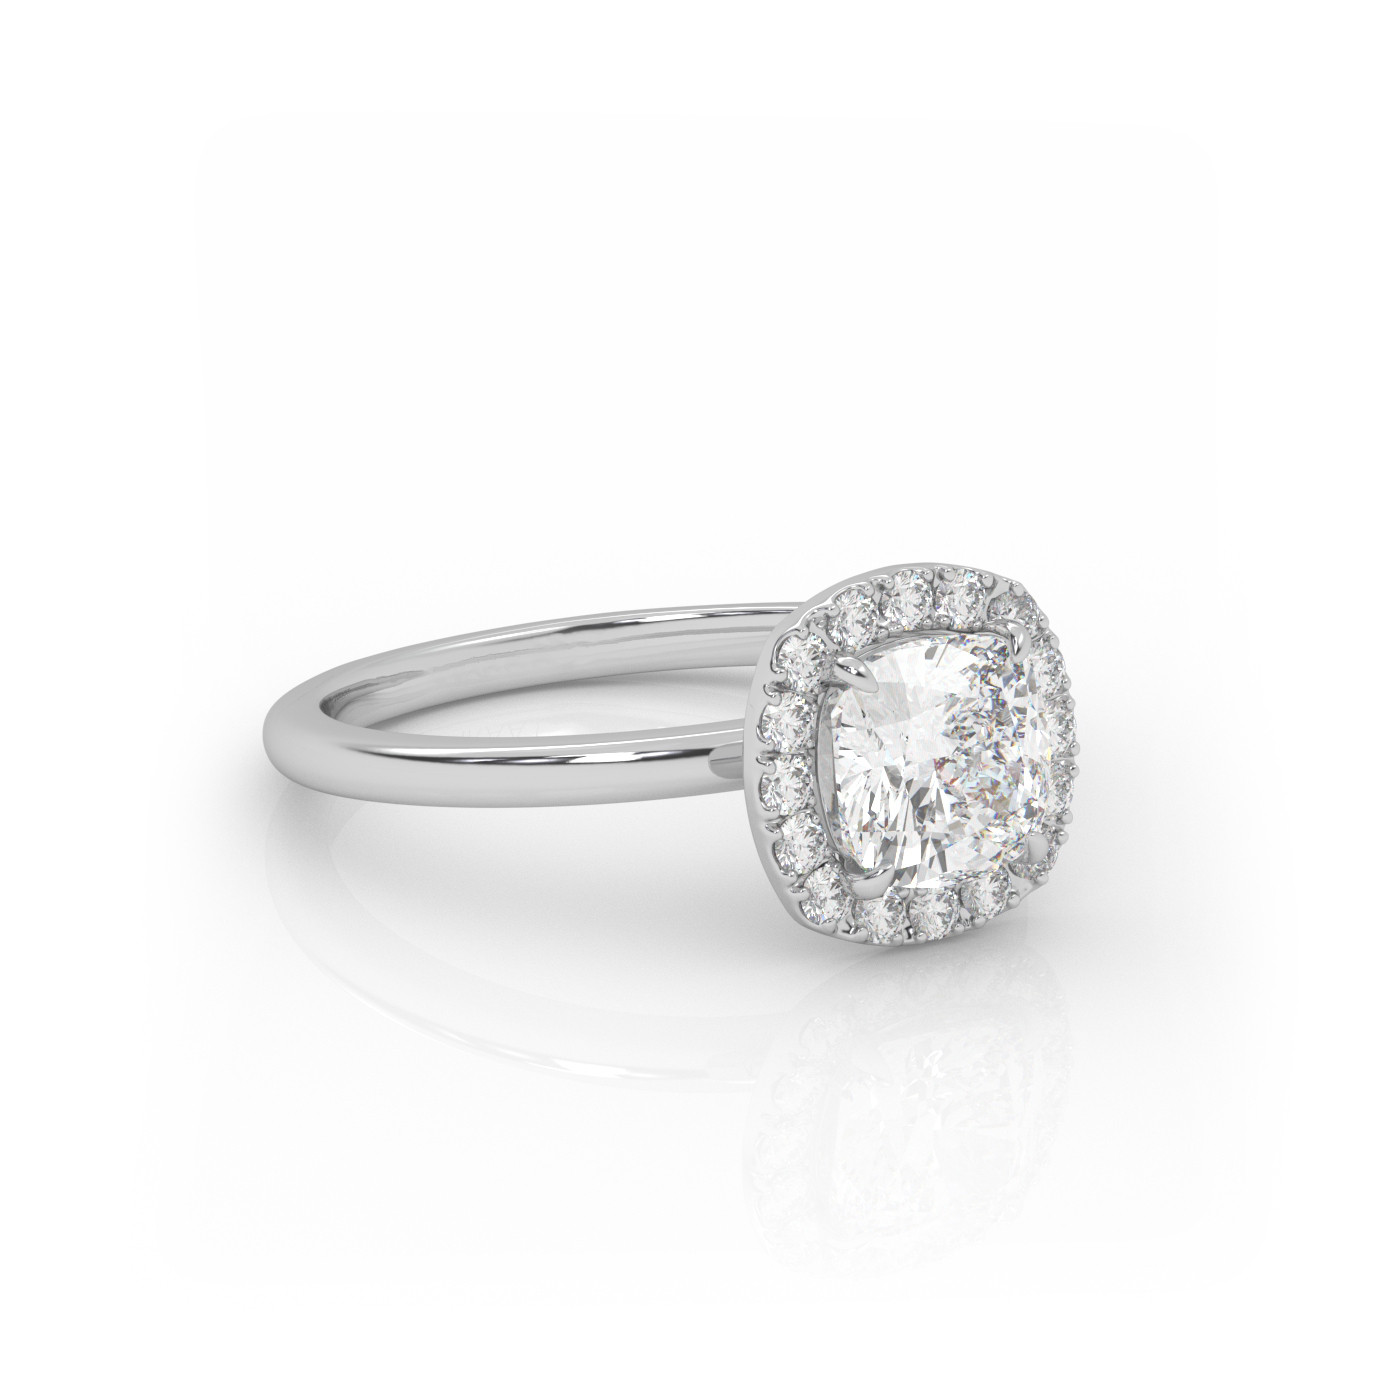 18K WHITE GOLD Cushion Cut Engagement Ring with Halo Style